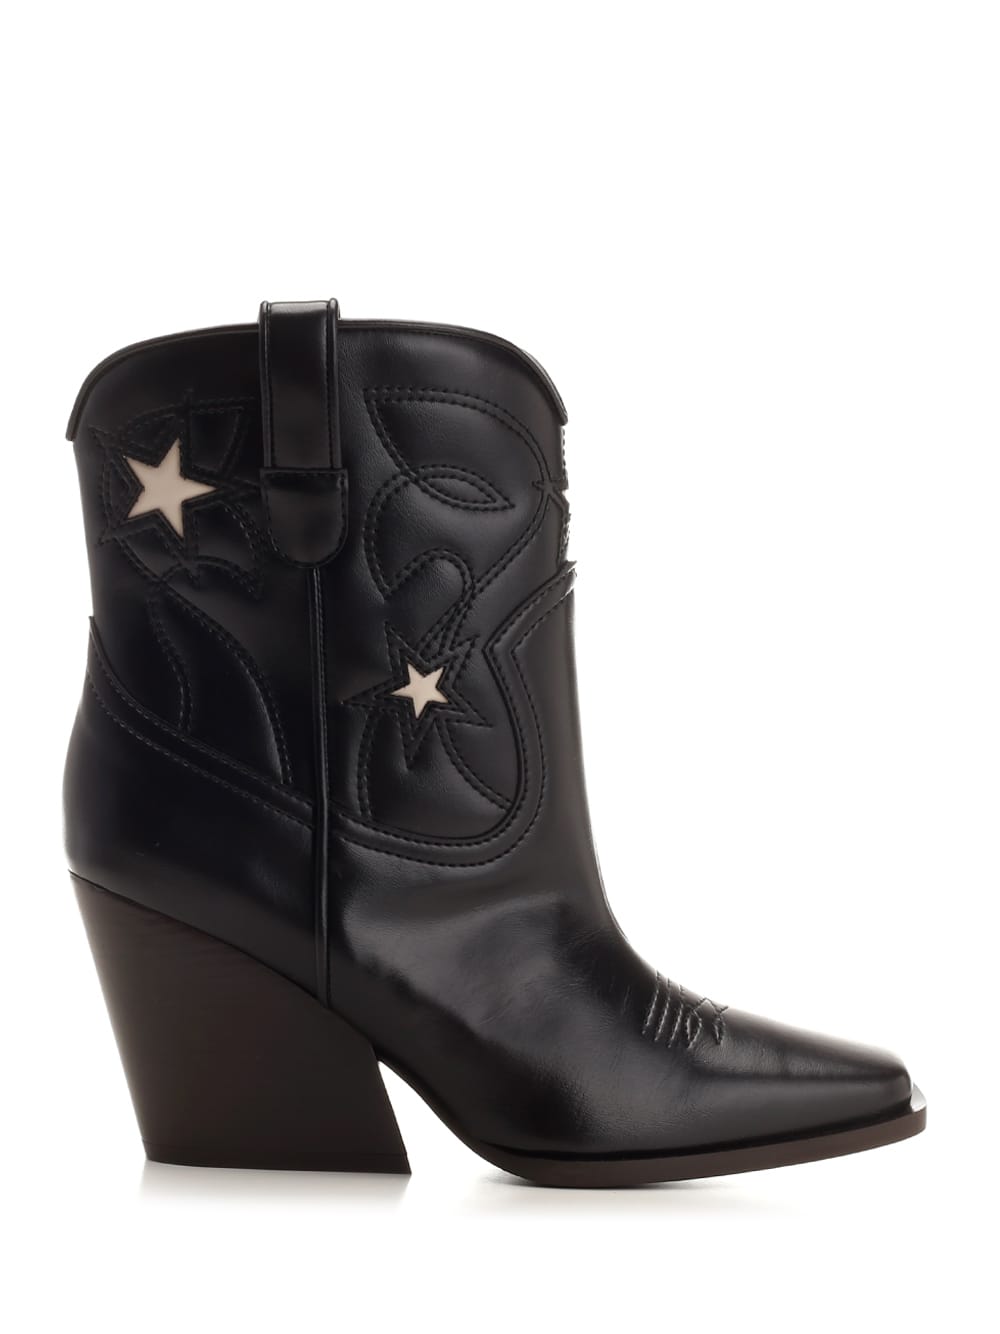 Stella Mccartney Cowboy Ankle Boots In Black/stone